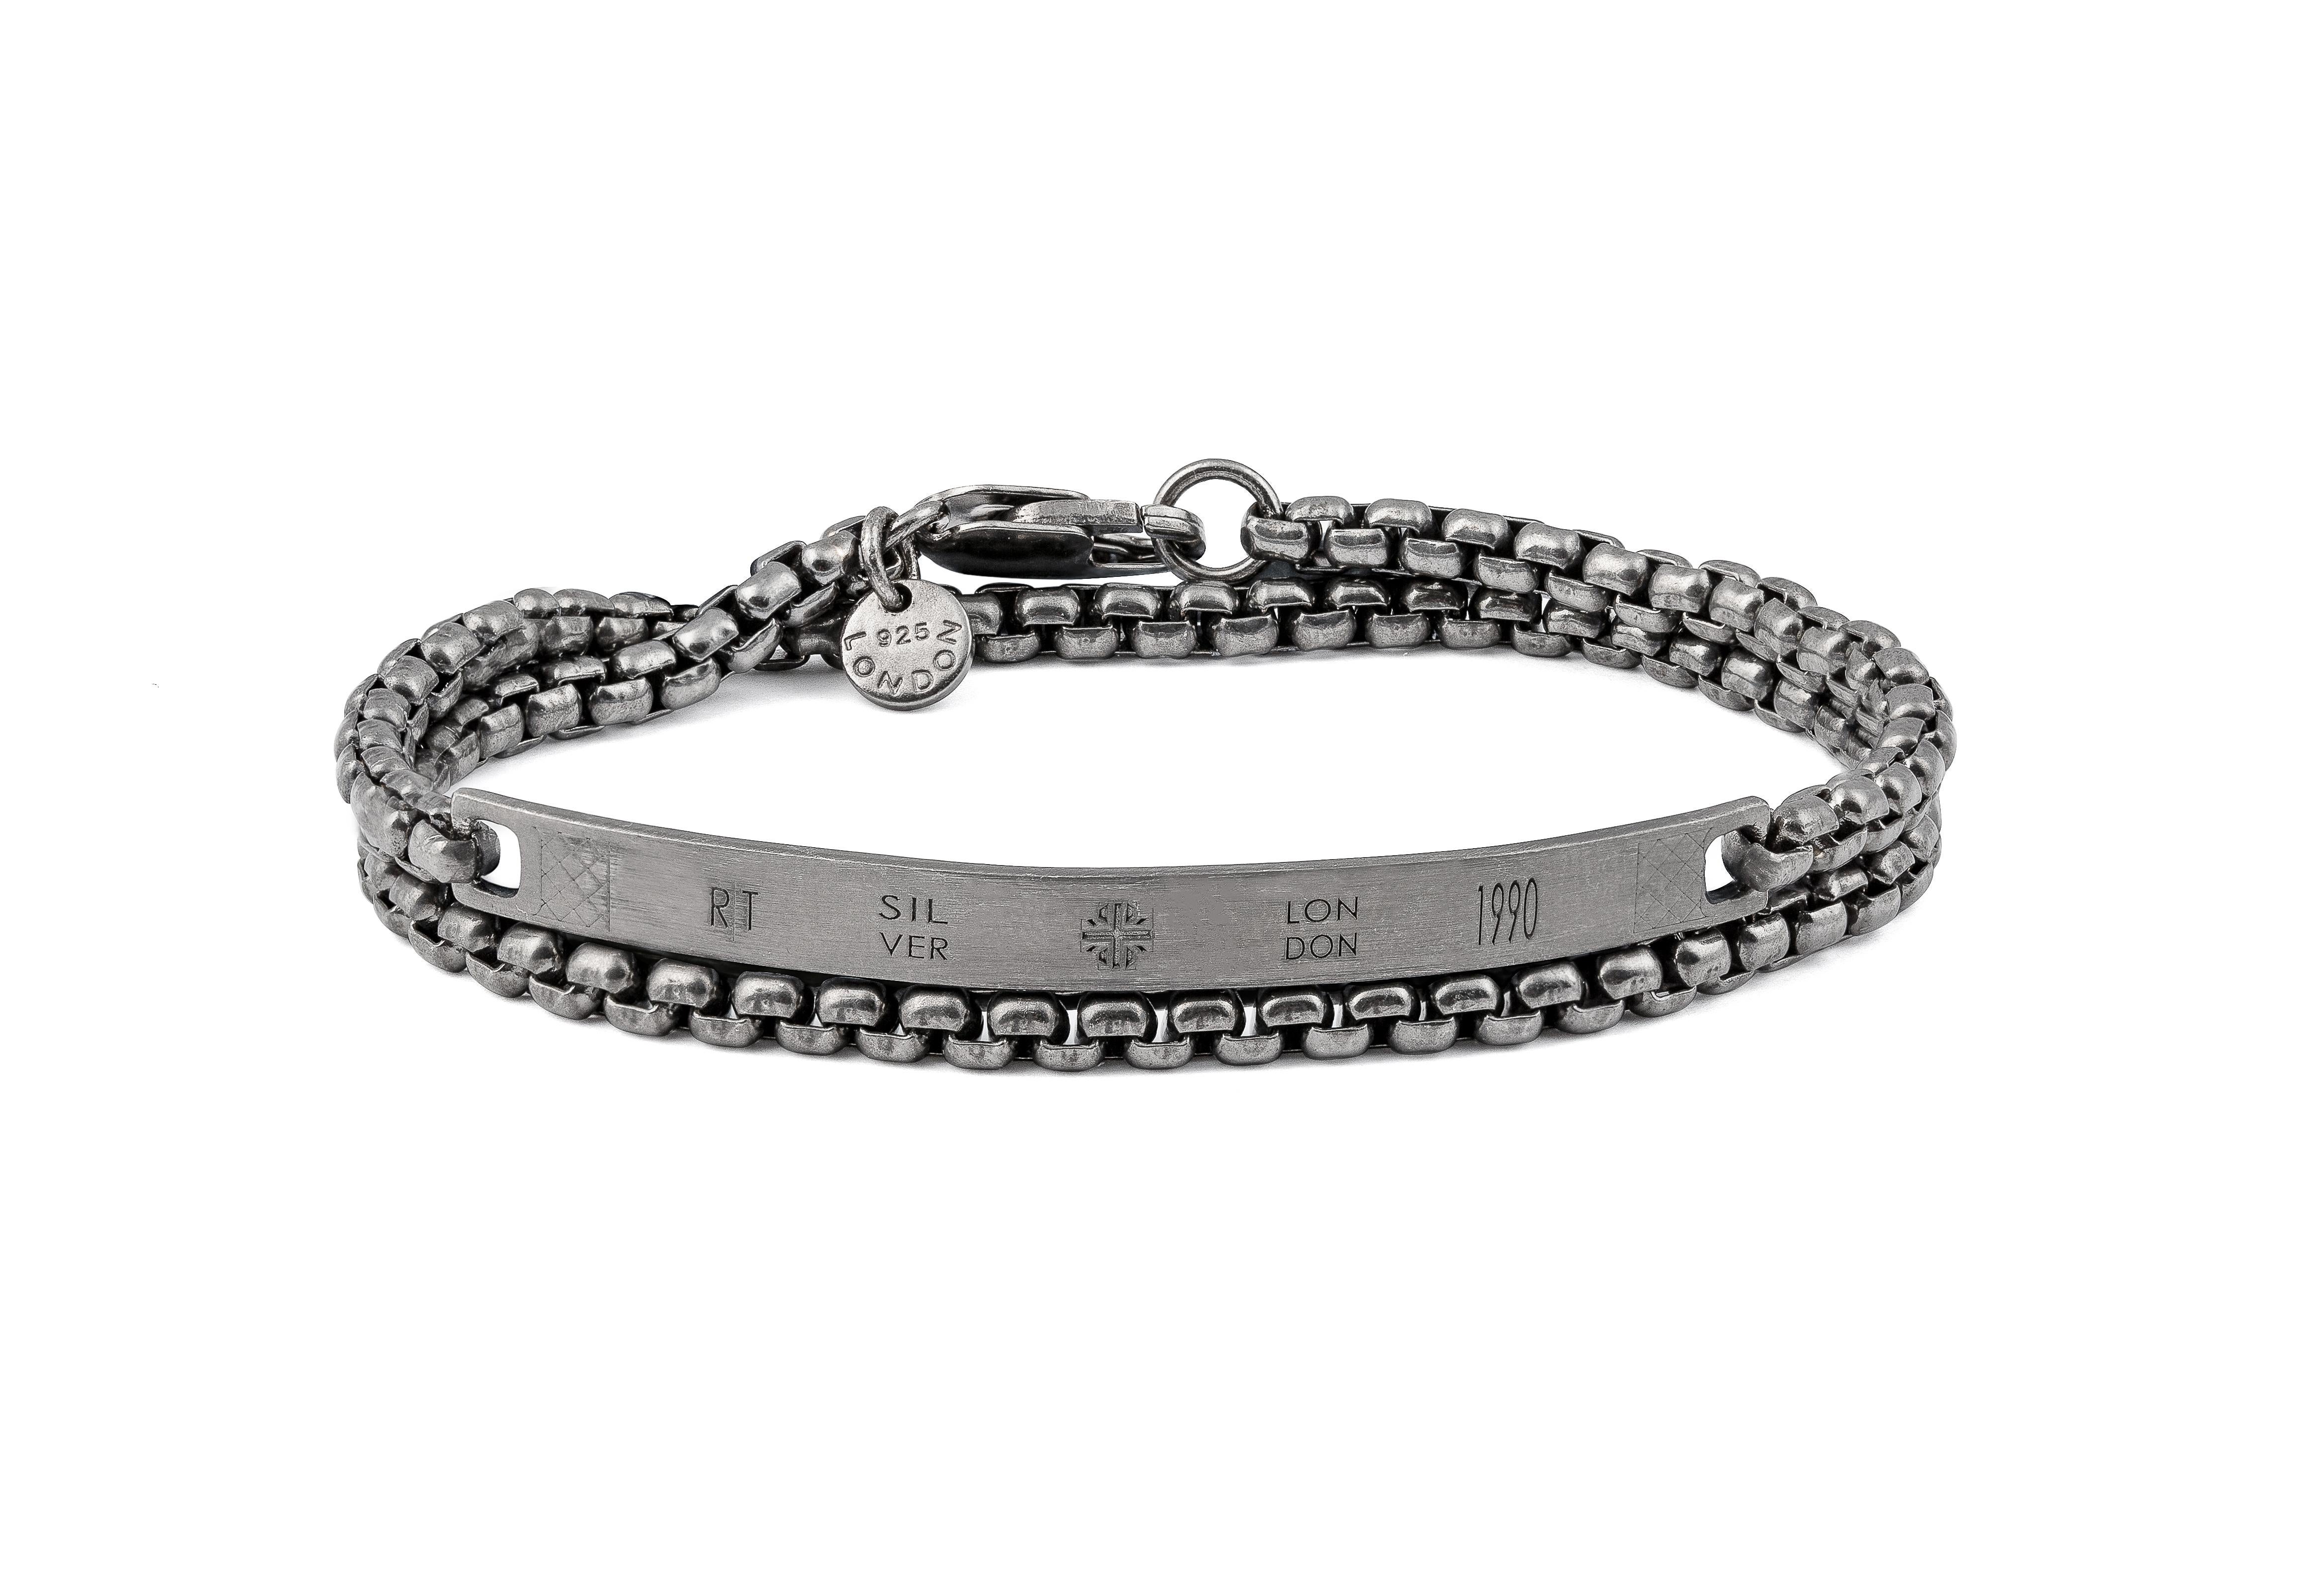 Identity Chain Bracelet In Brushed Black Rhodium Plated Sterling Silver, Size M

Our silver box chain has been extended into a sleek double wrap bracelet, with a smooth, curved bar decorated with our hallmarks. Finished in matte black, rhodium